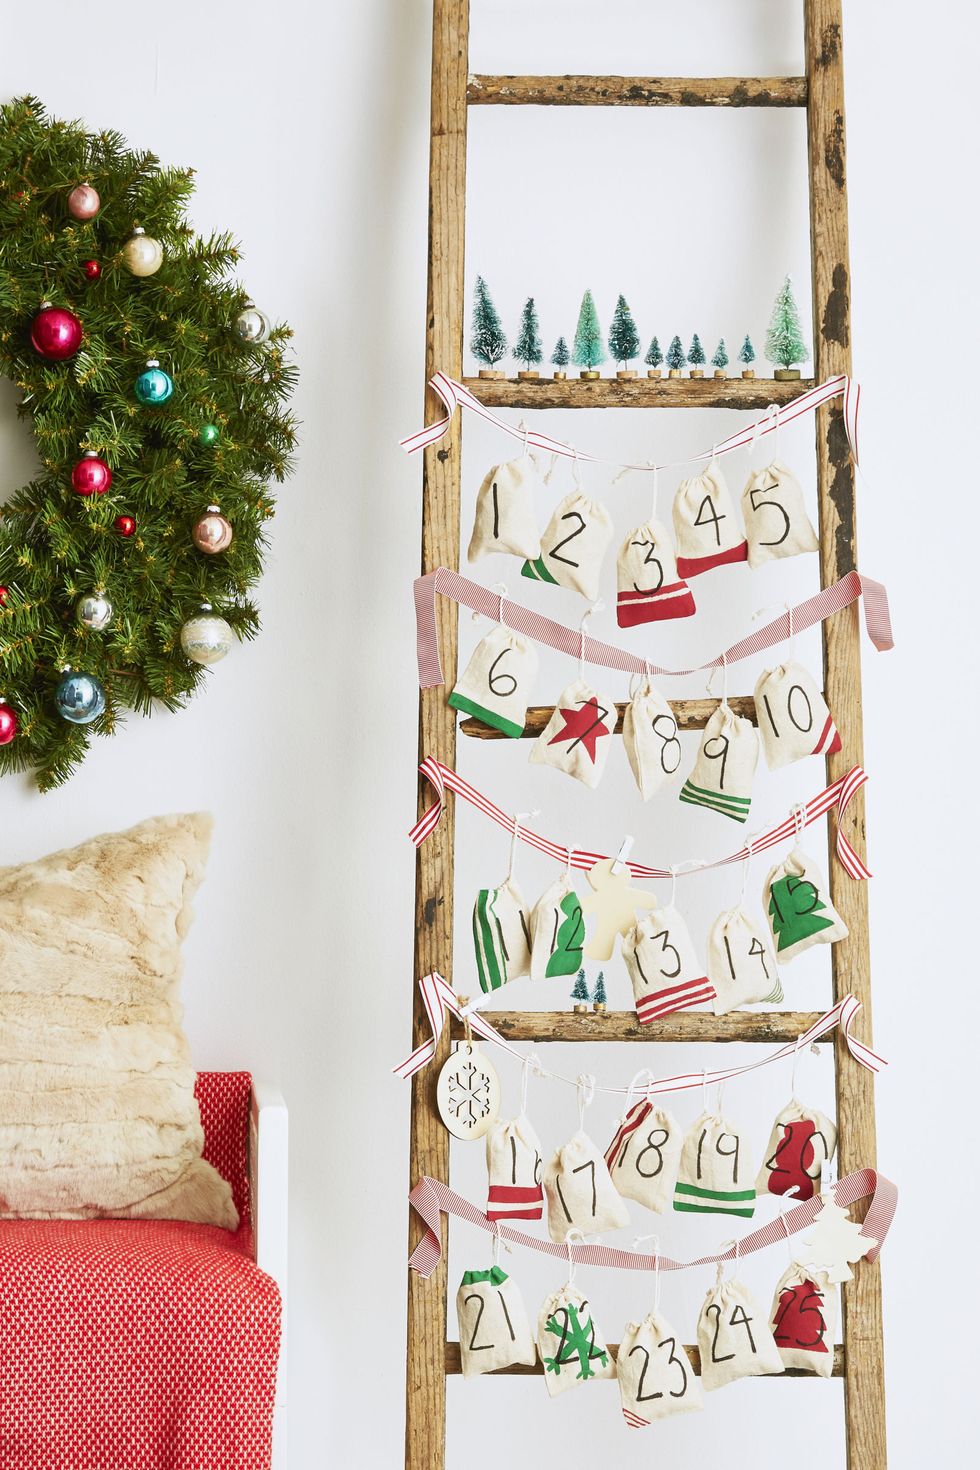 Who doesn’t love advent calendars? Source: House Beautiful